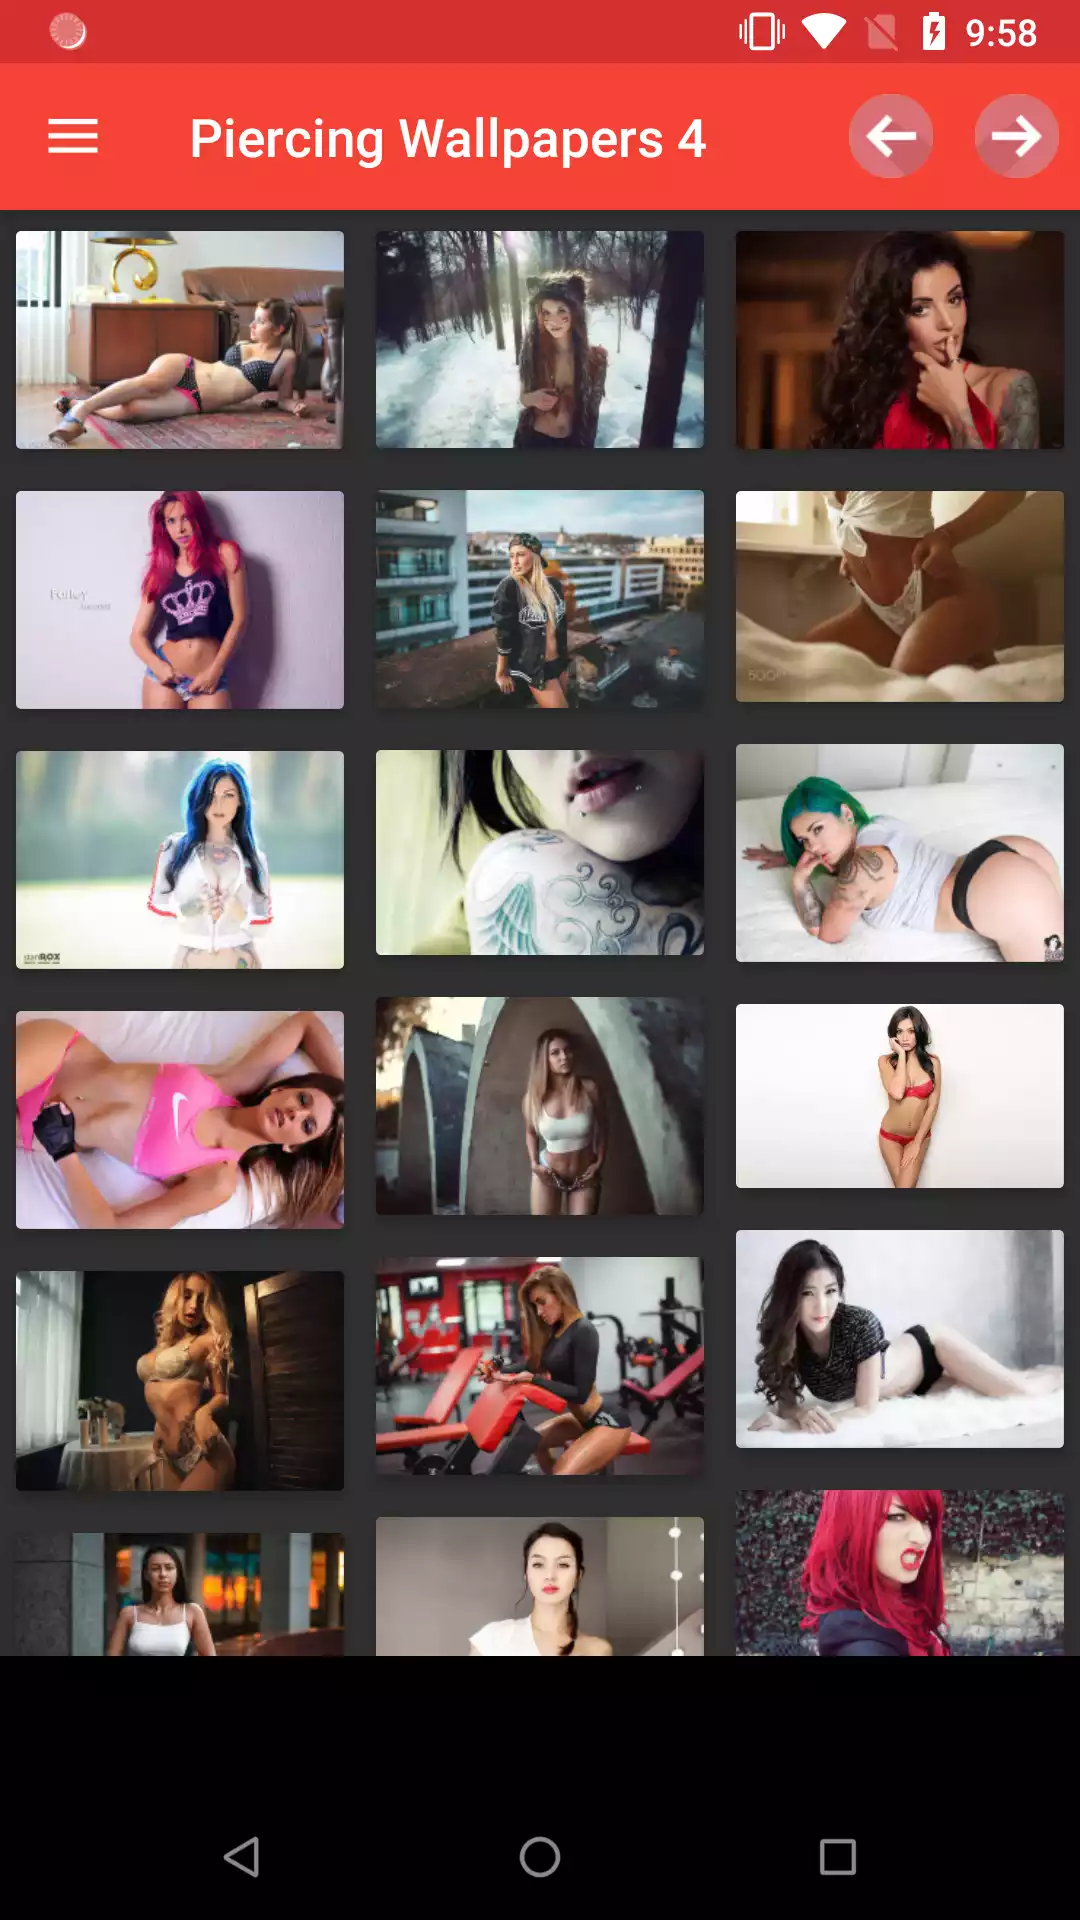 Piercing Wallpapers apps,erotic,apk,porn,star,baixar,hintai,gay,personalizations,pics,app,sexy,backgrounds,pictures,piercing,free,android,fetish,girls,mature,futanari,wallpapers,hentai,wallpaper